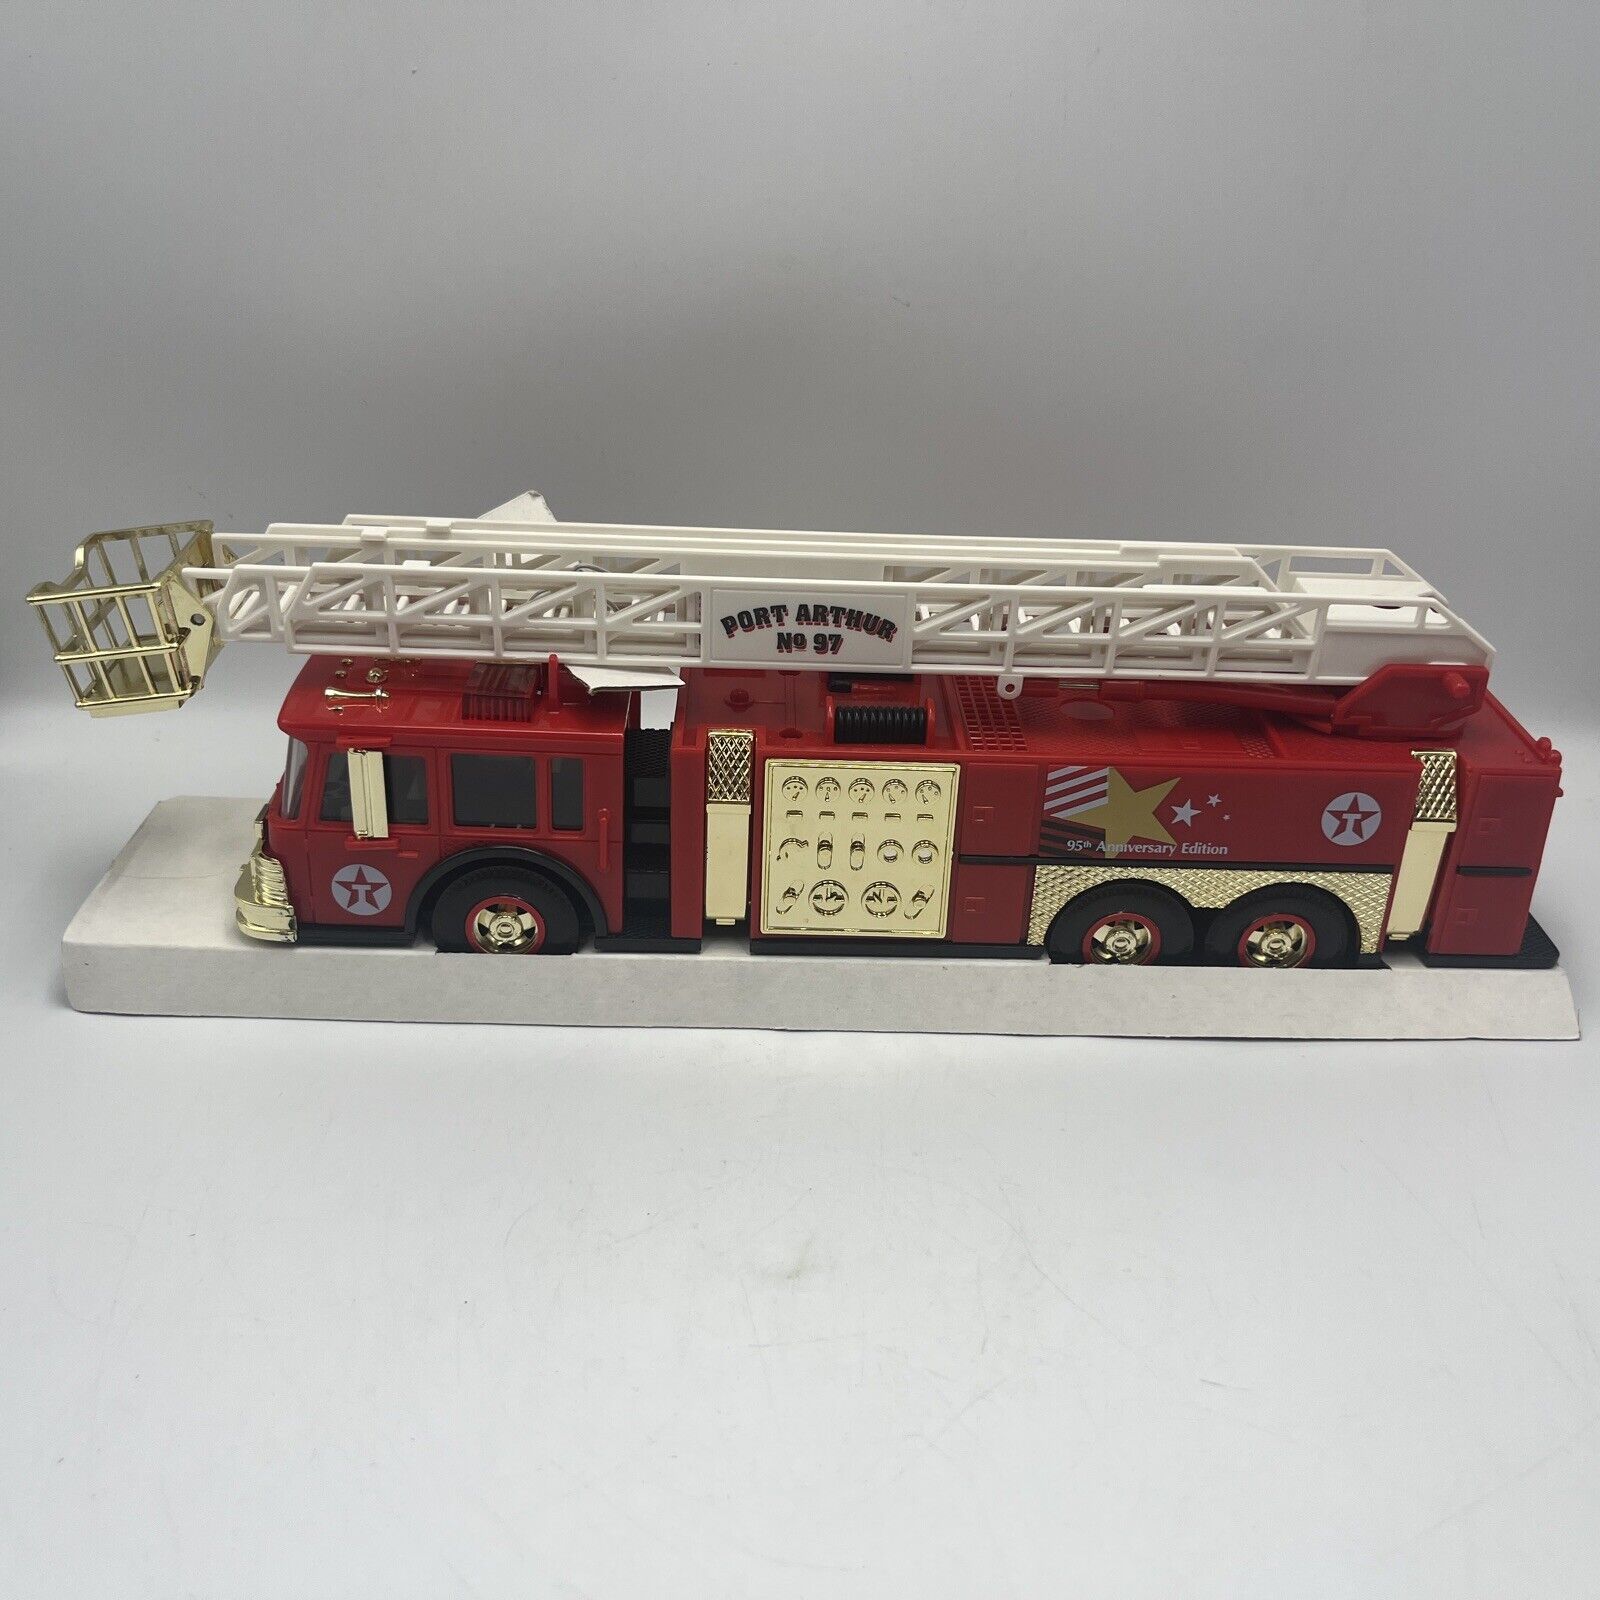 NEW 1997 TEXACO AERIAL TOWER FIRE TRUCK NUMBERED GOLD SERIAL NUMBERED